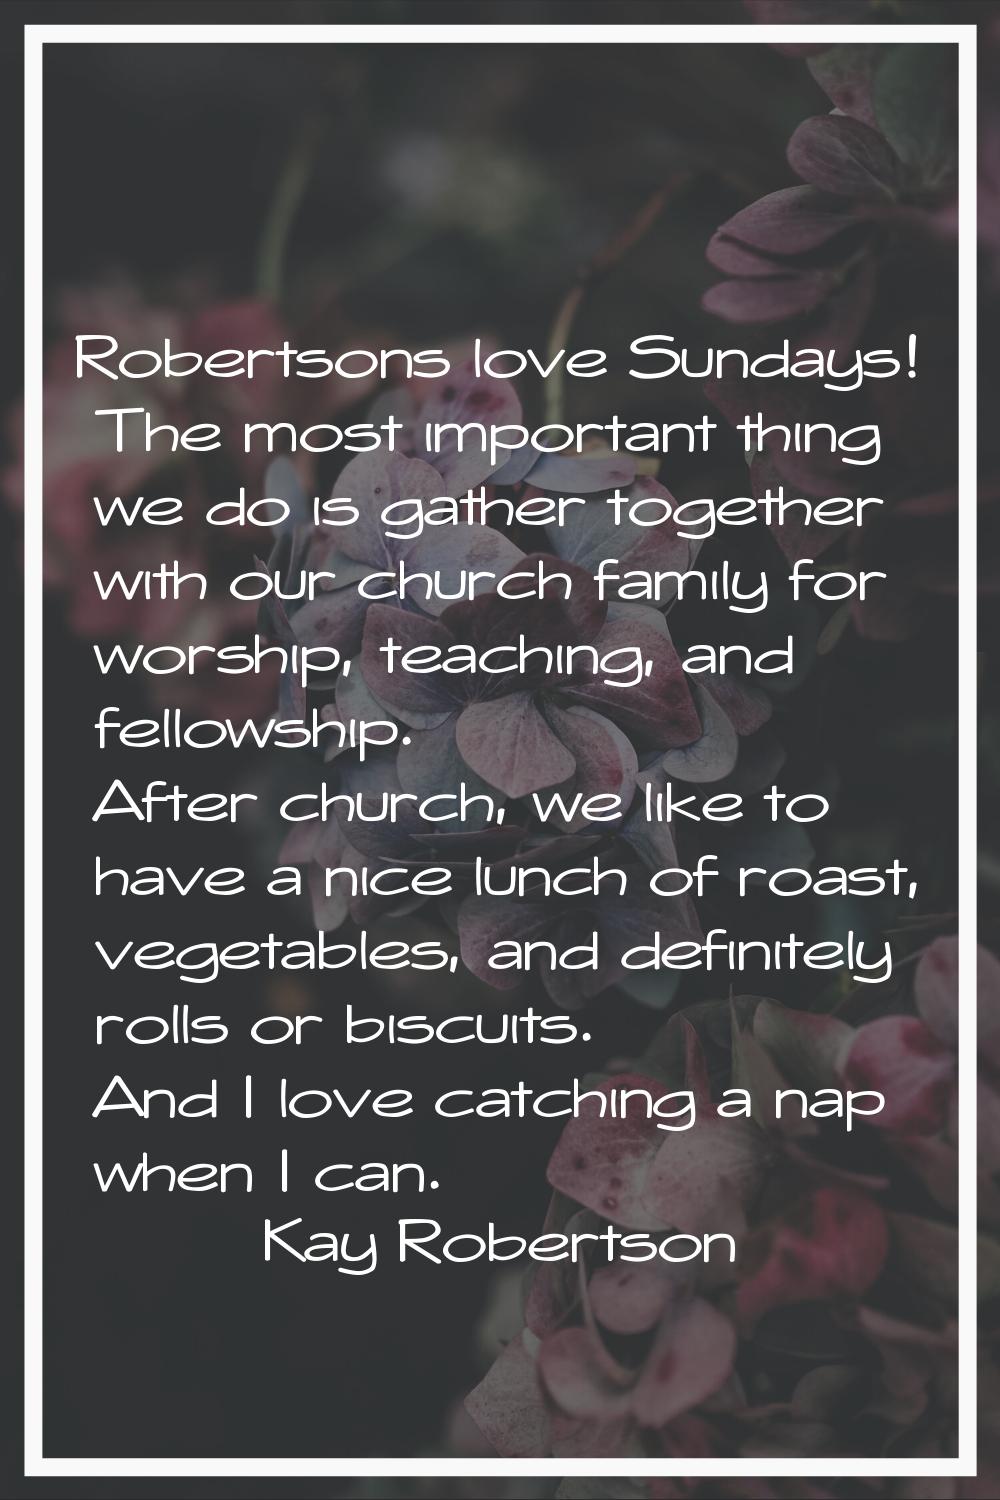 Robertsons love Sundays! The most important thing we do is gather together with our church family f